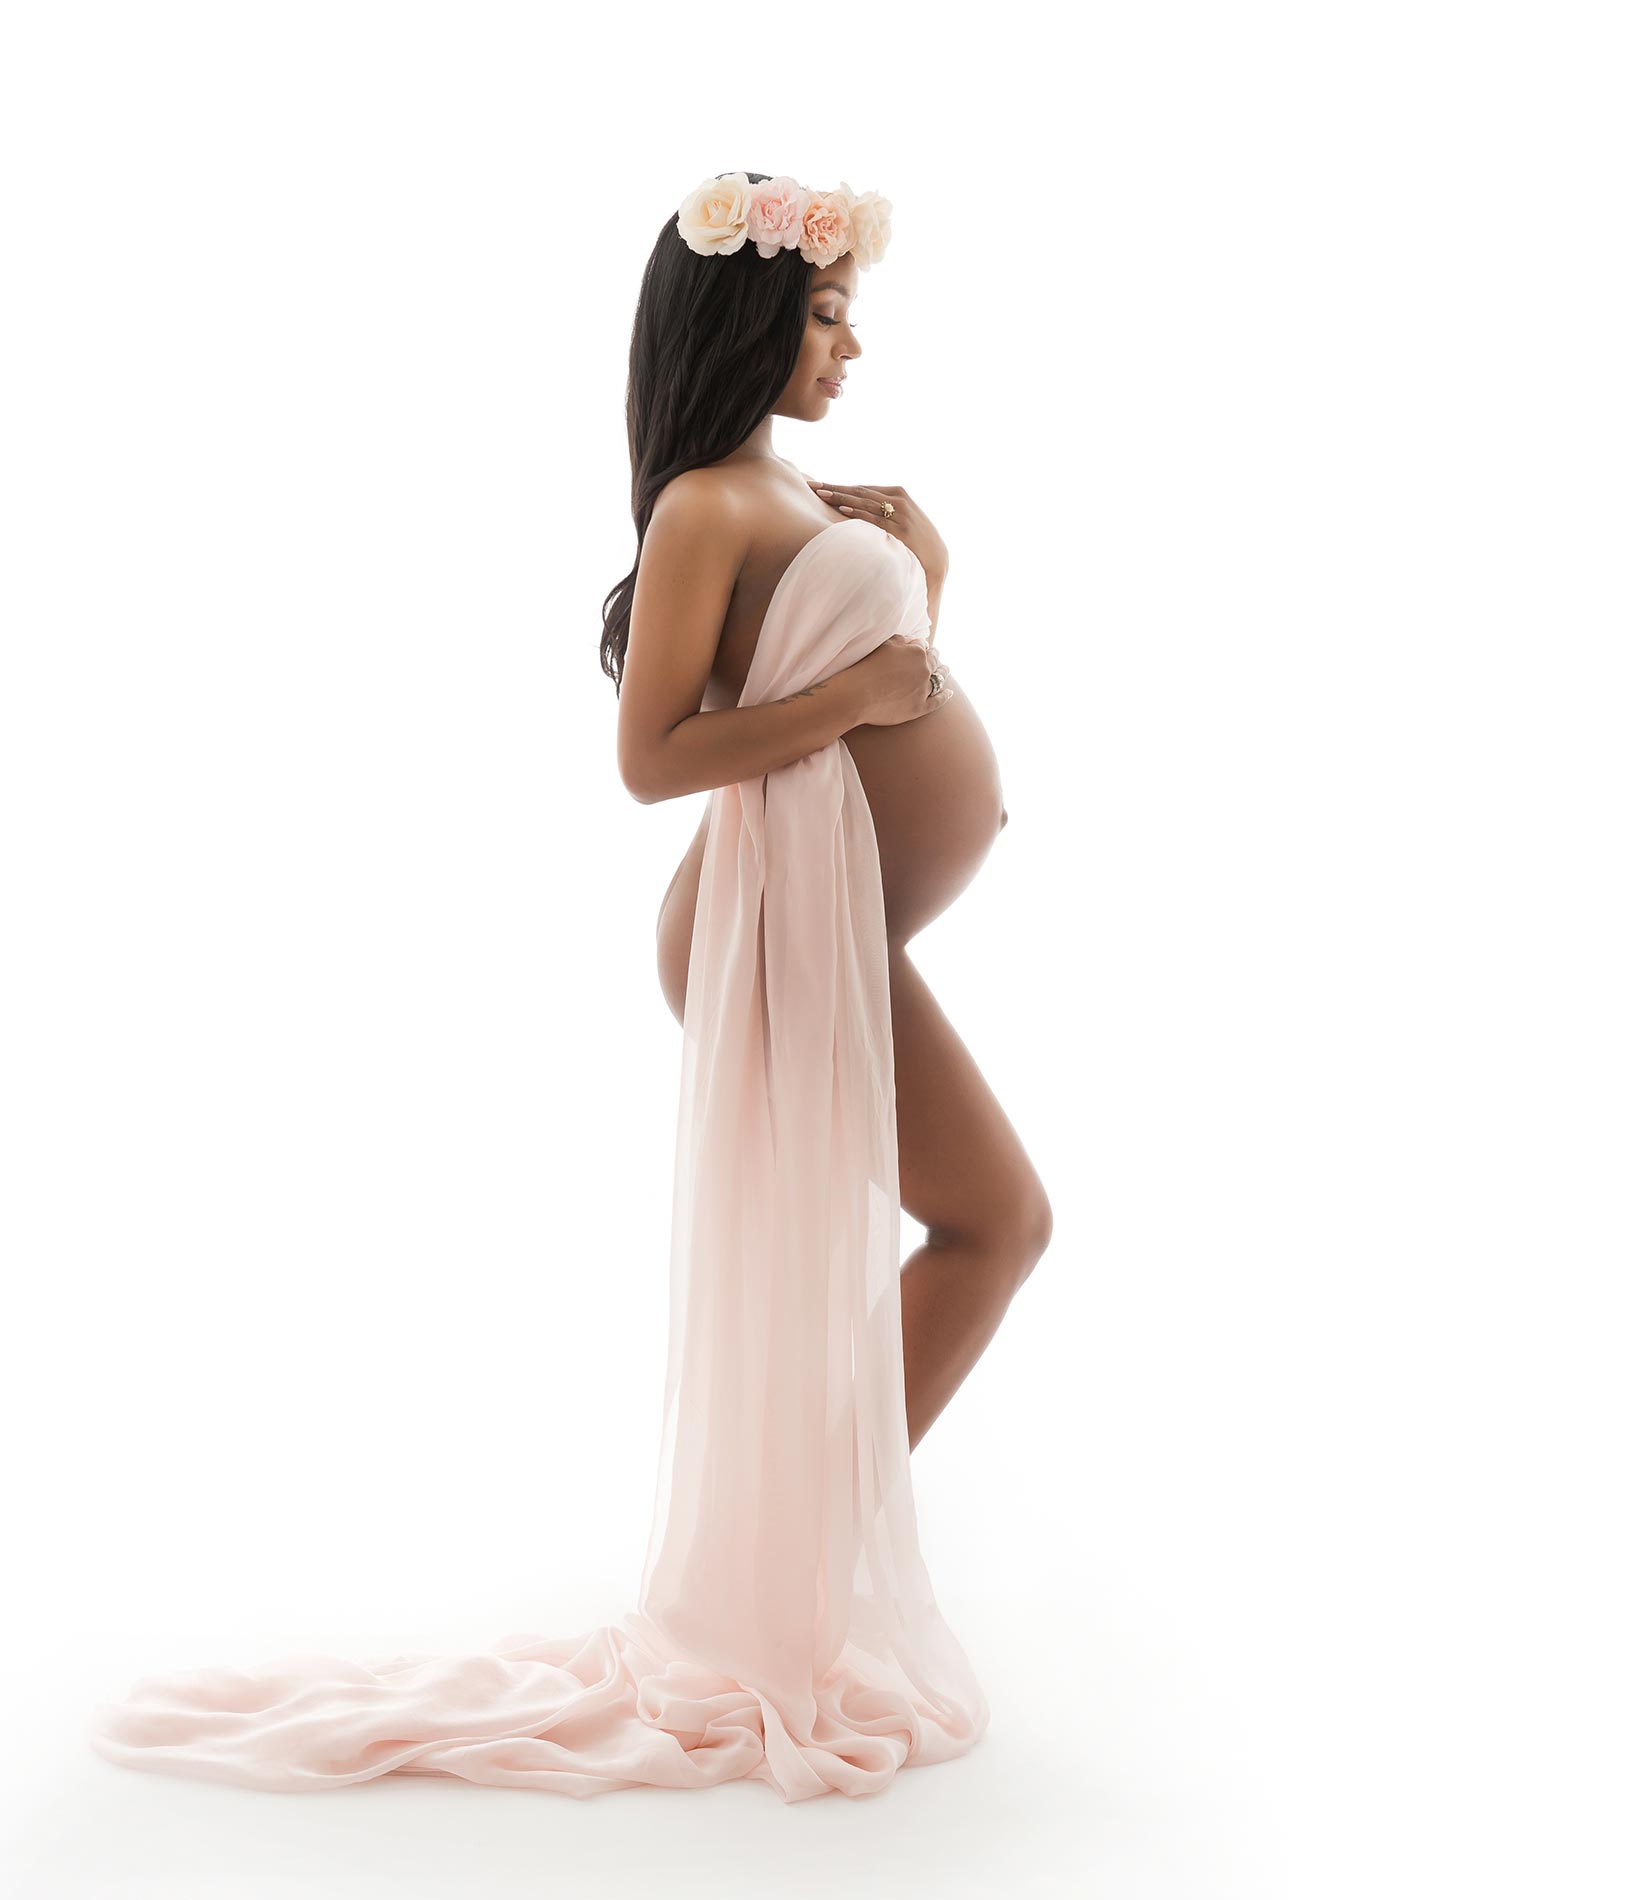 Pregnant woman at a NYC photo studio wearing a rose headpiece